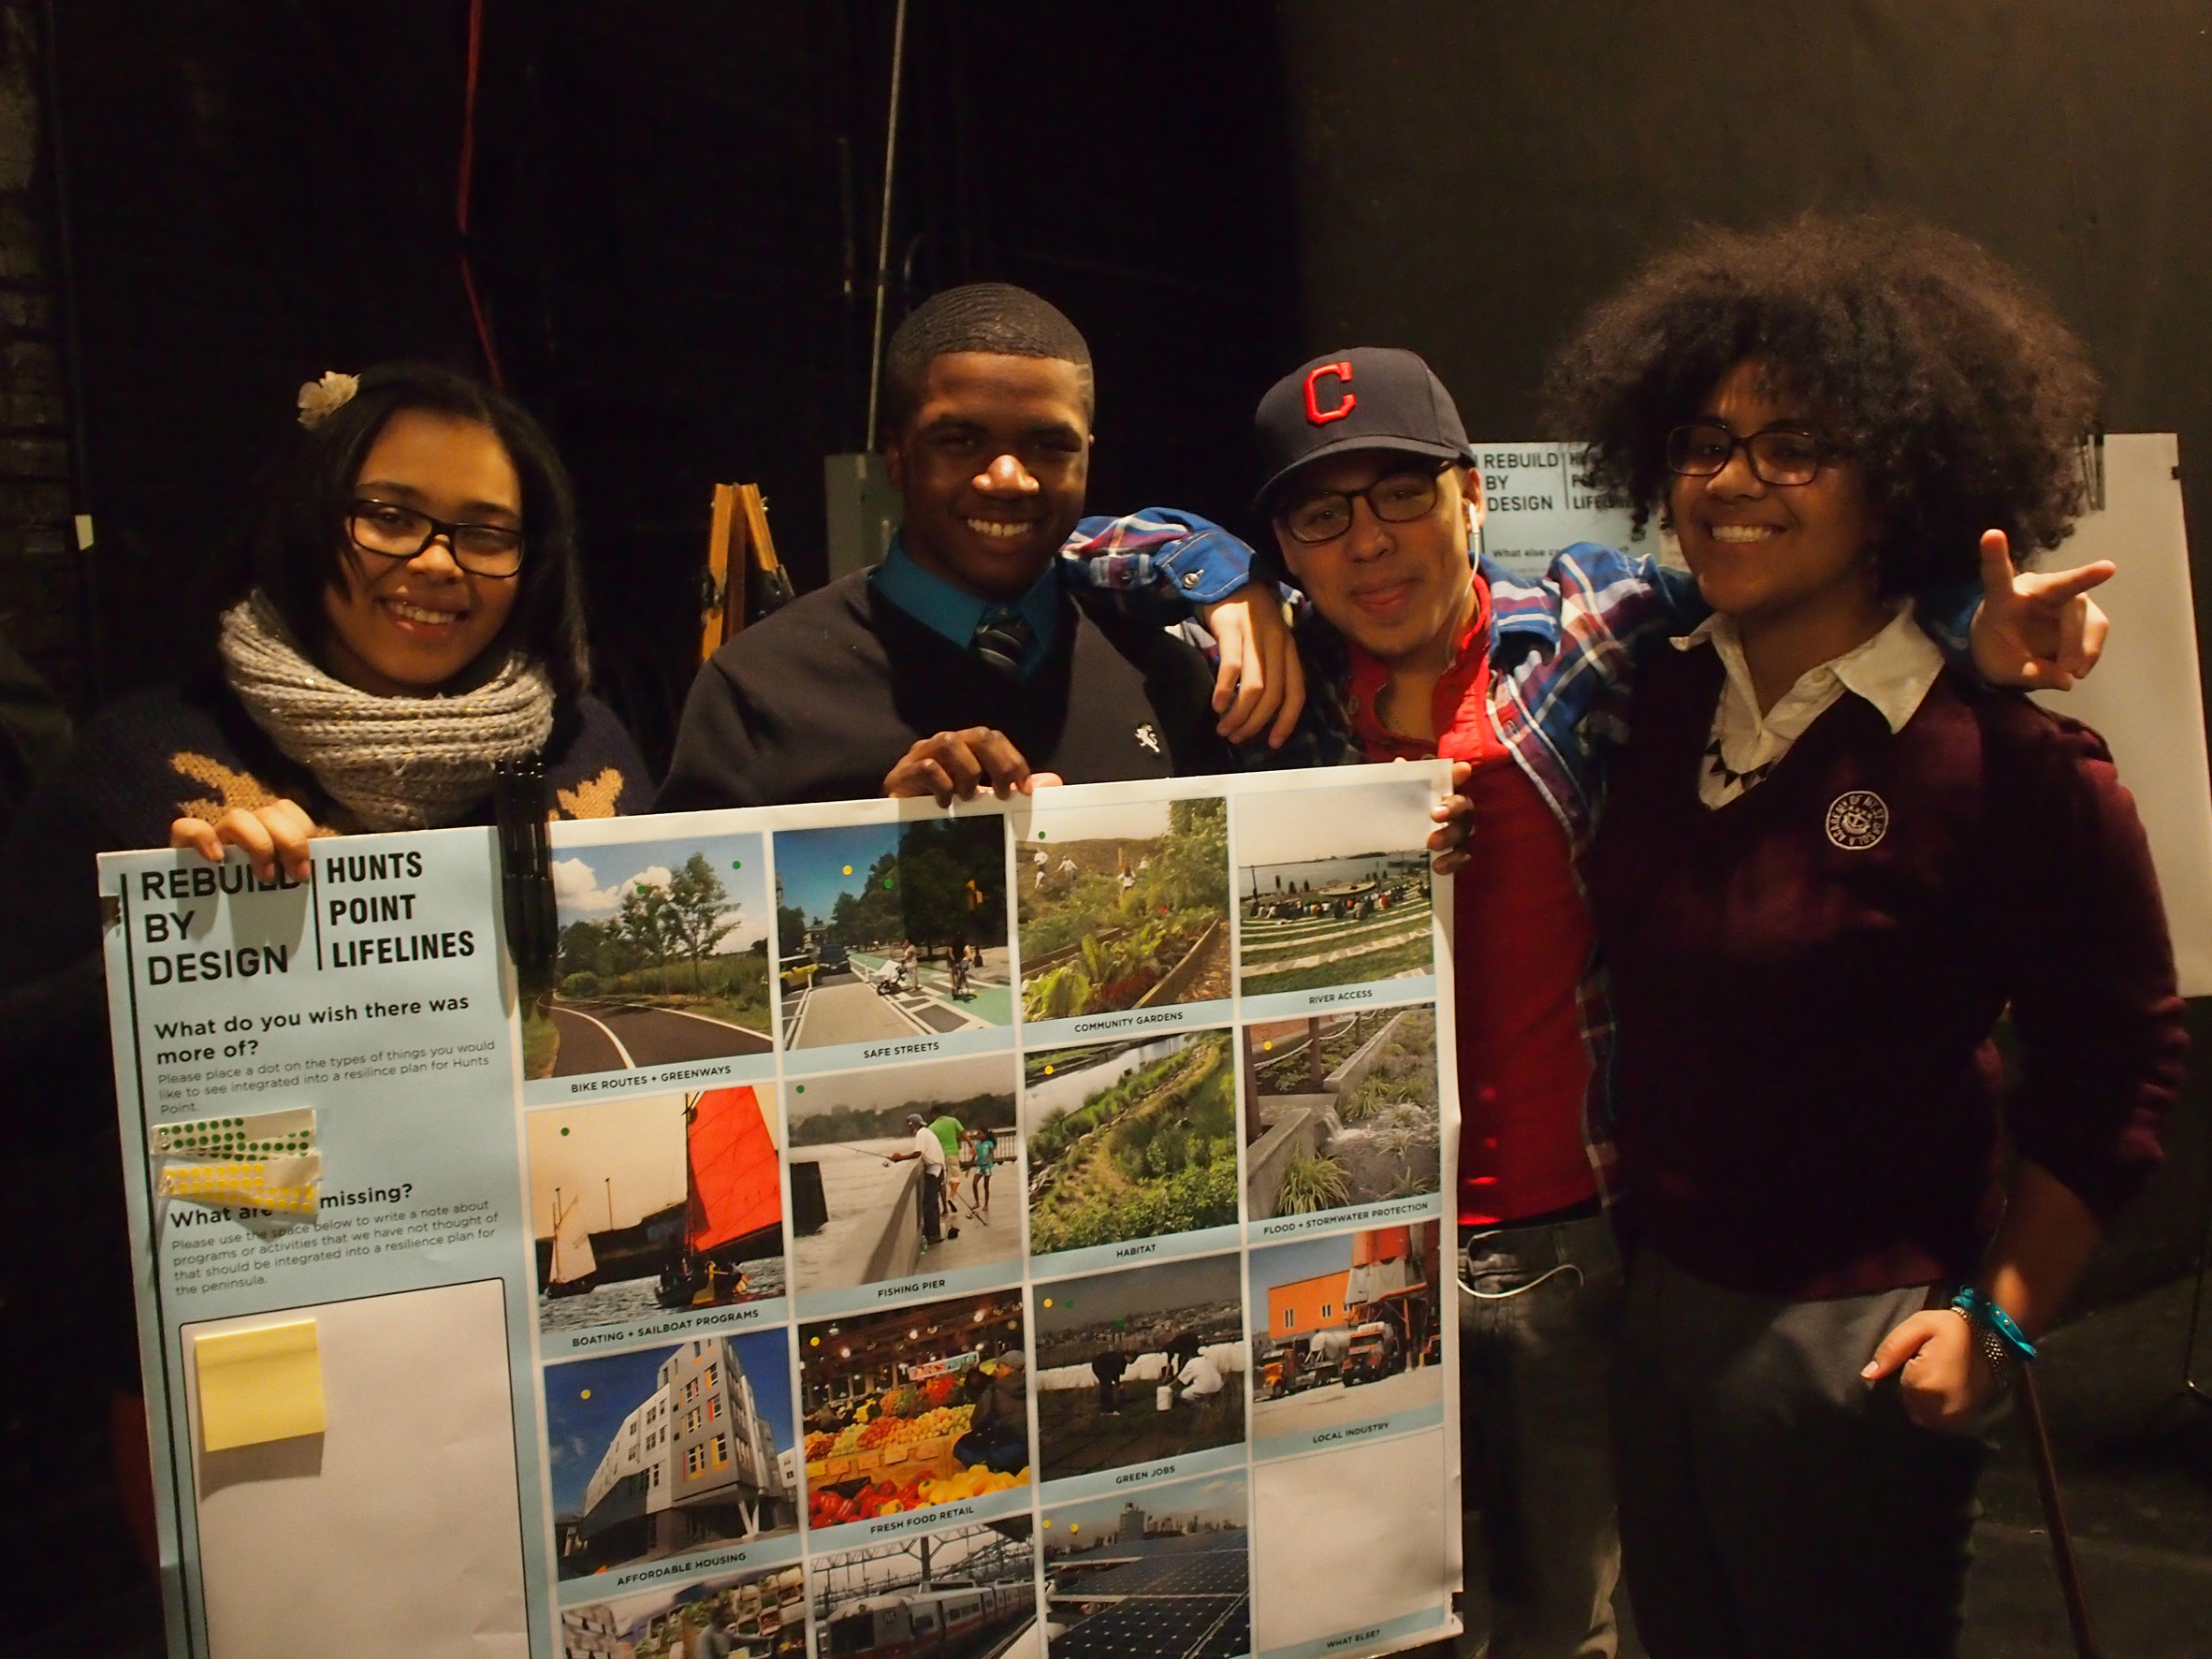 Photo of four teenagers holding up a presentation poster headed "Hunts Point Lifelines" and featuring images and headings for bike routes, greenways, safe streets, community gardens, river access and more